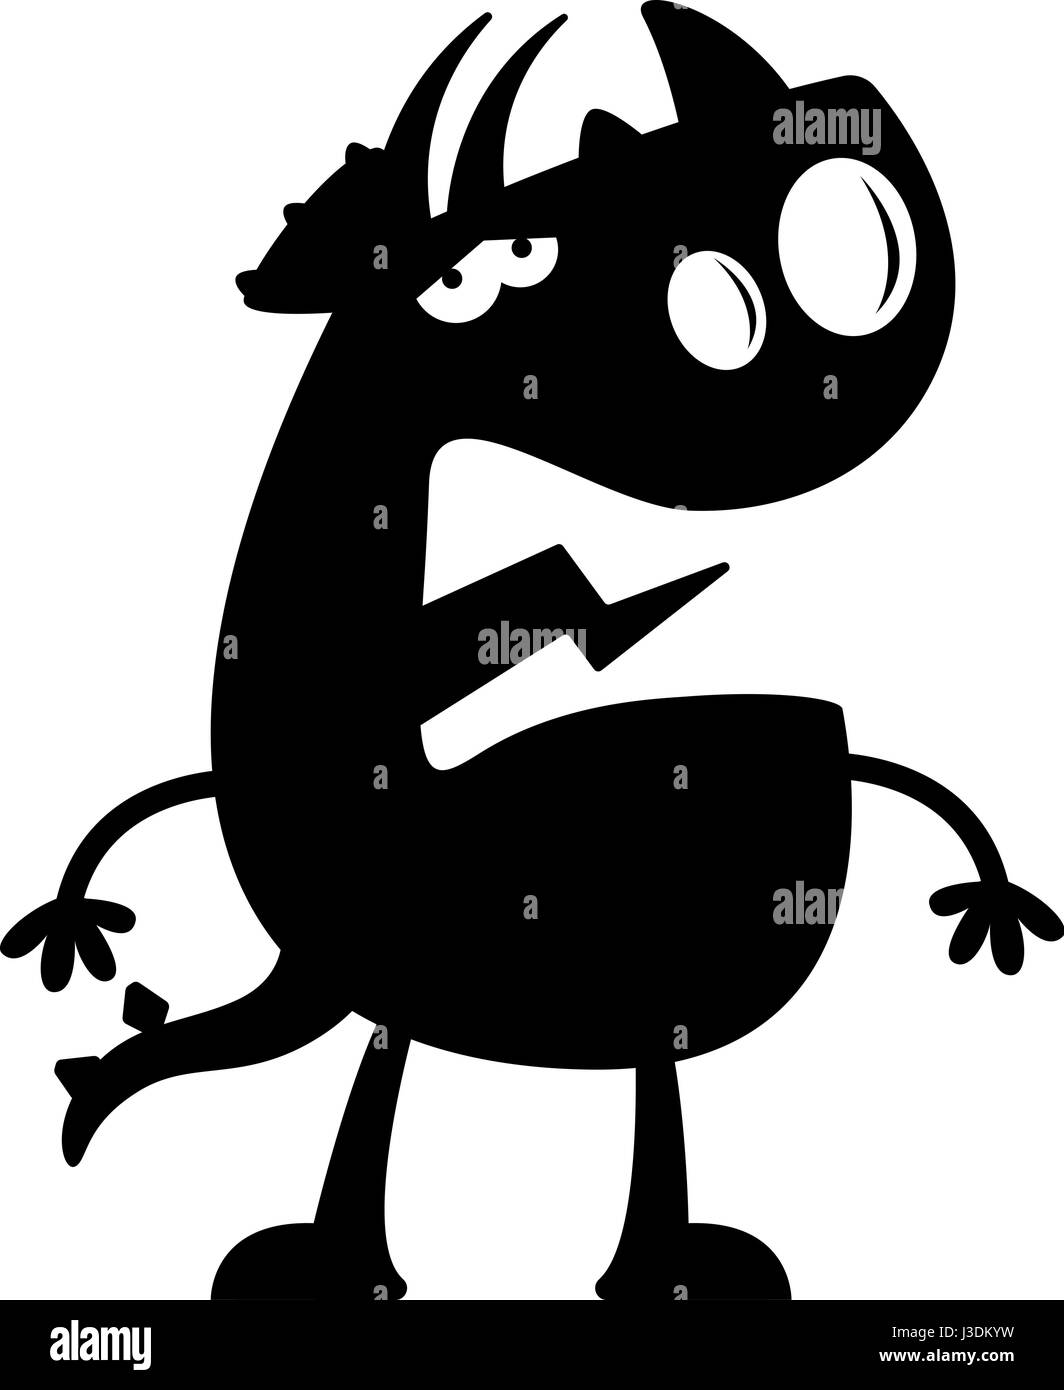 A cartoon silhouette of a triceratops dinosaur looking sad and tired. Stock Vector